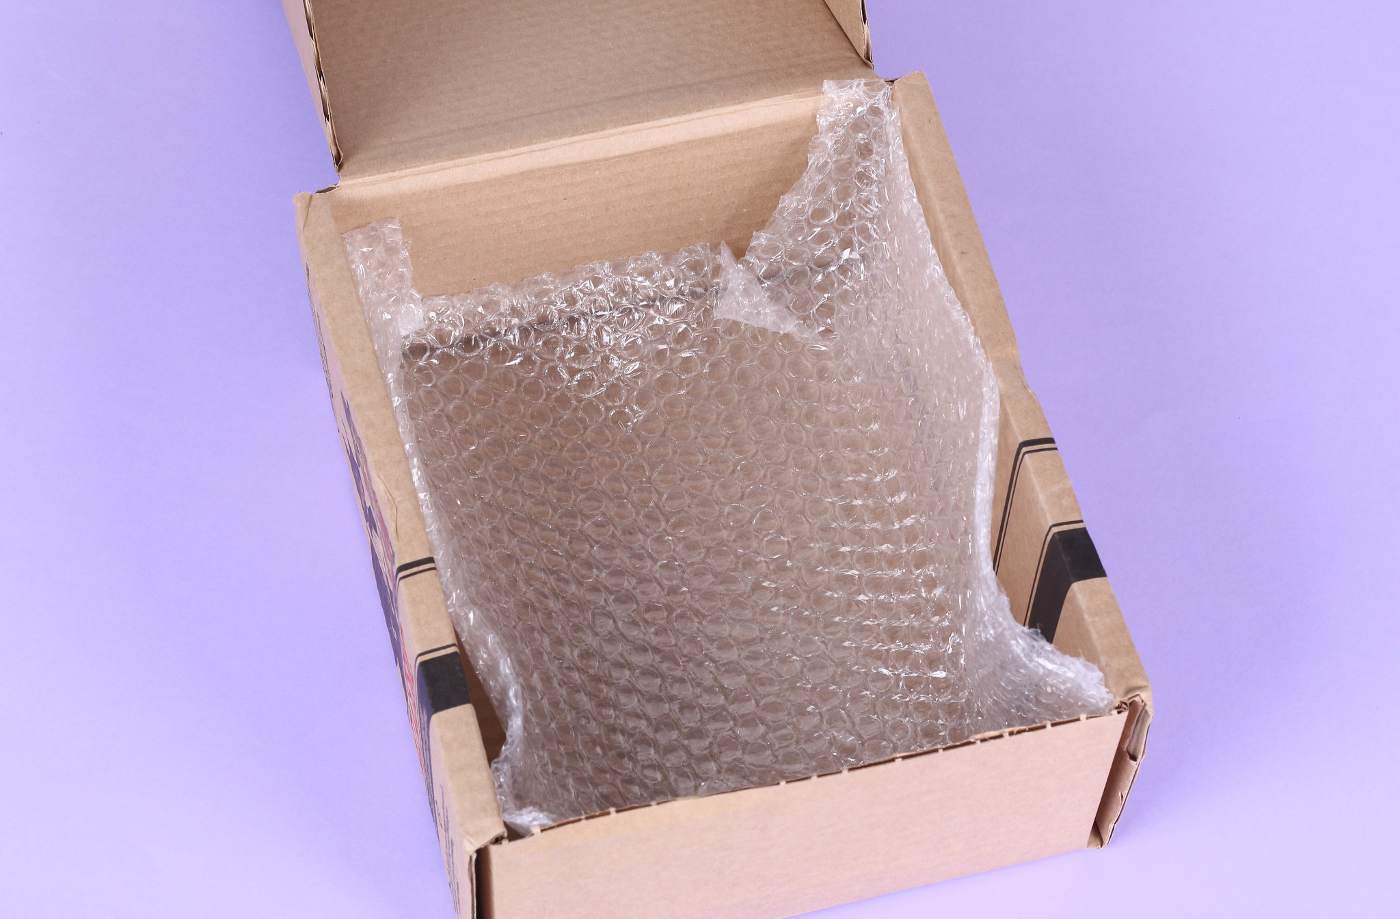 Cardboard box lined with bubble wrap - - How to reduce the noise of a mixer grinder